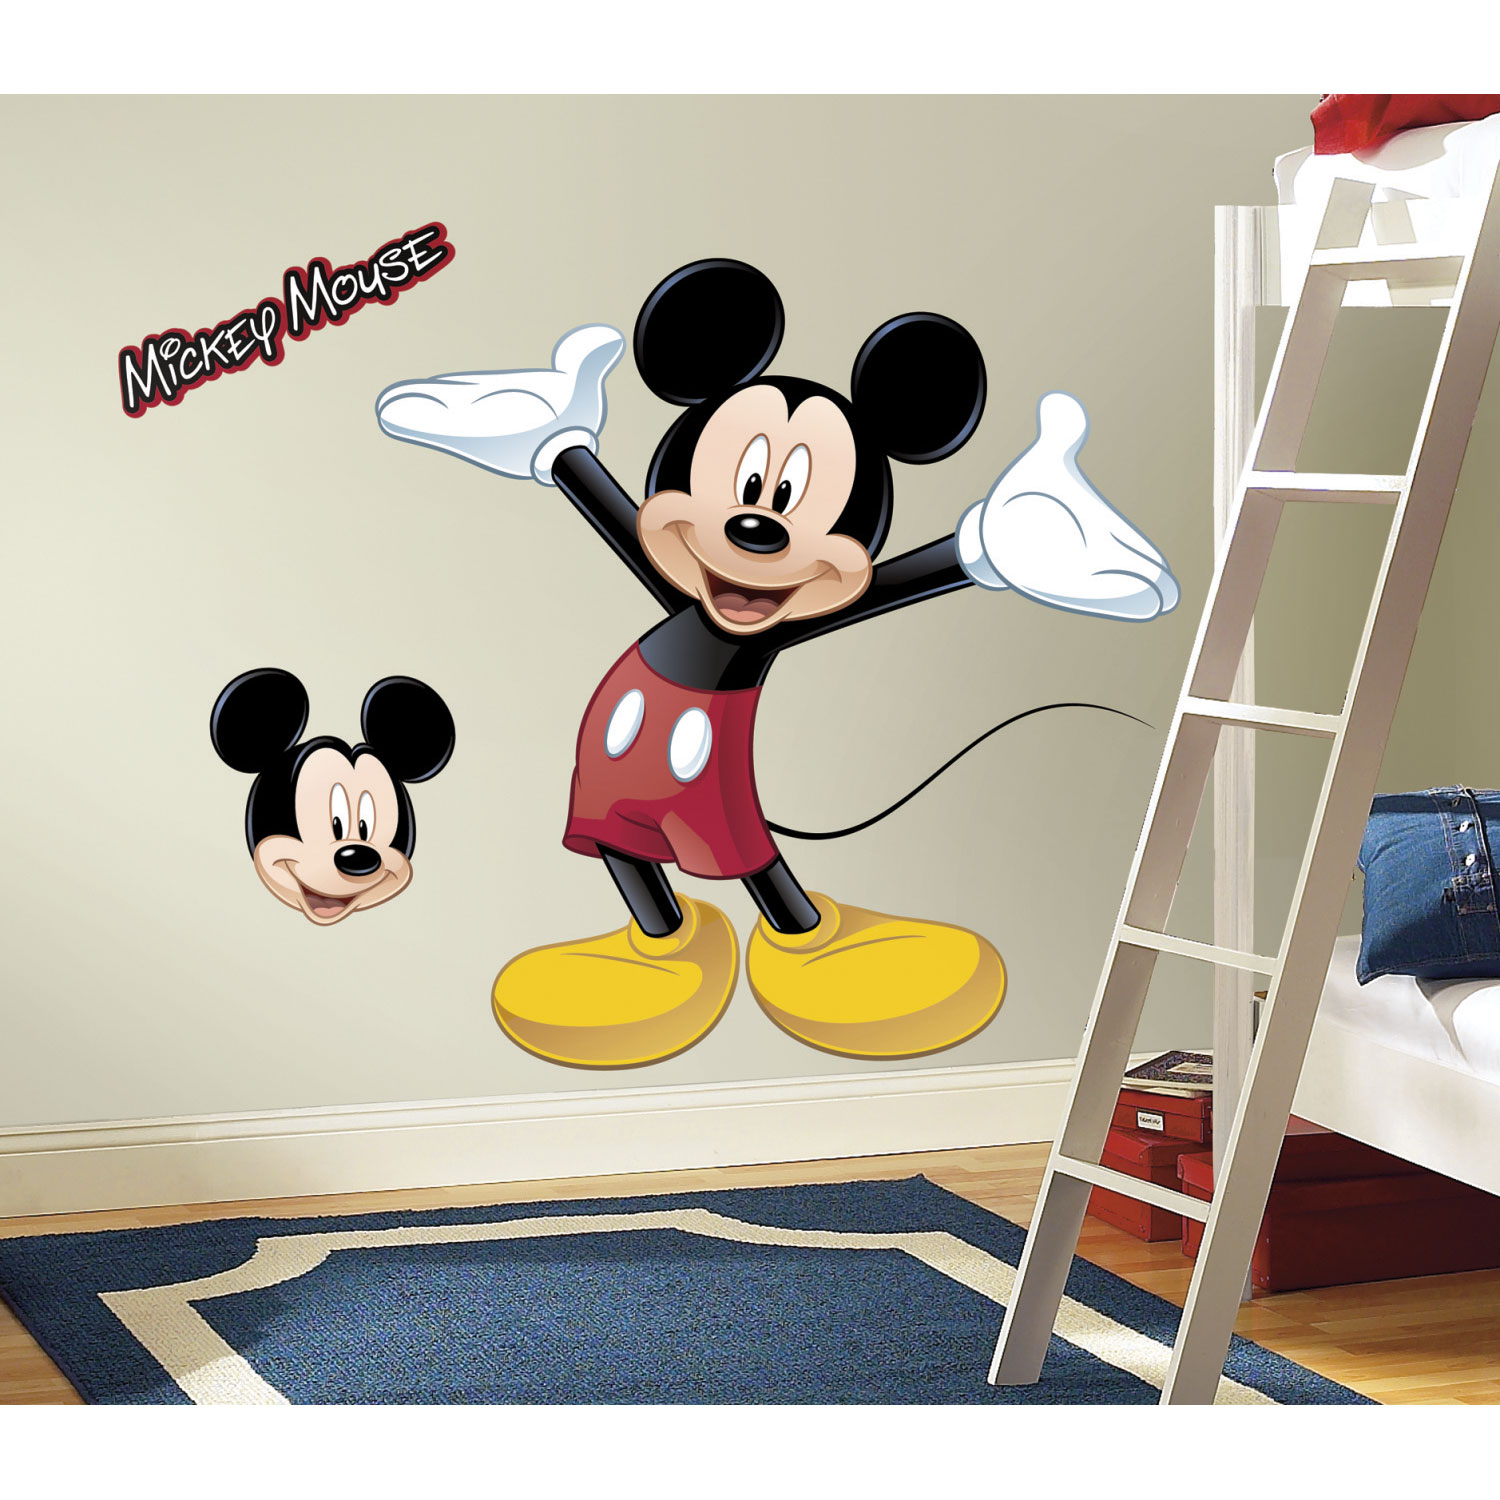 RoomMates Mickey Mouse Giant Peel and Stick Wall Decal with Augmented Reality - Black